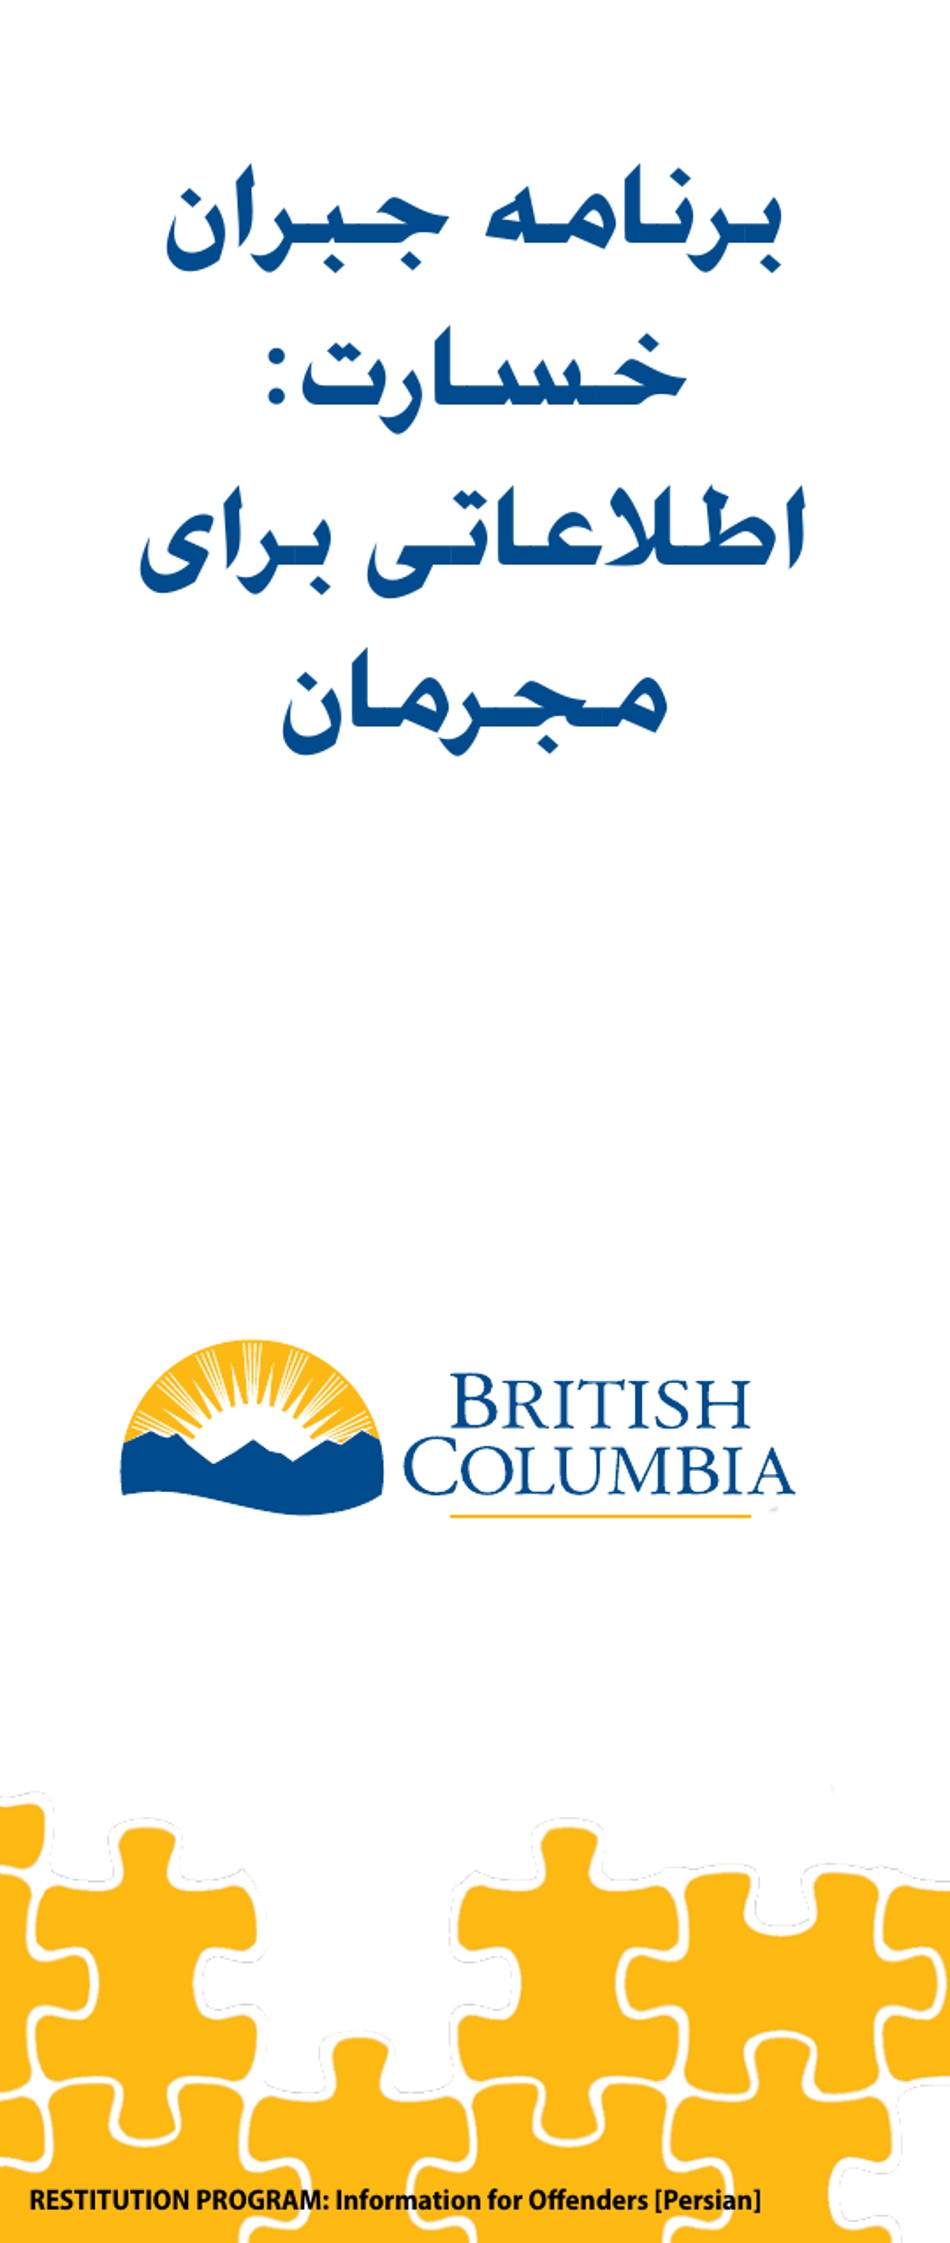 Restitution Program Application Form for Offenders - British Columbia, Canada (English / Persian), Page 1